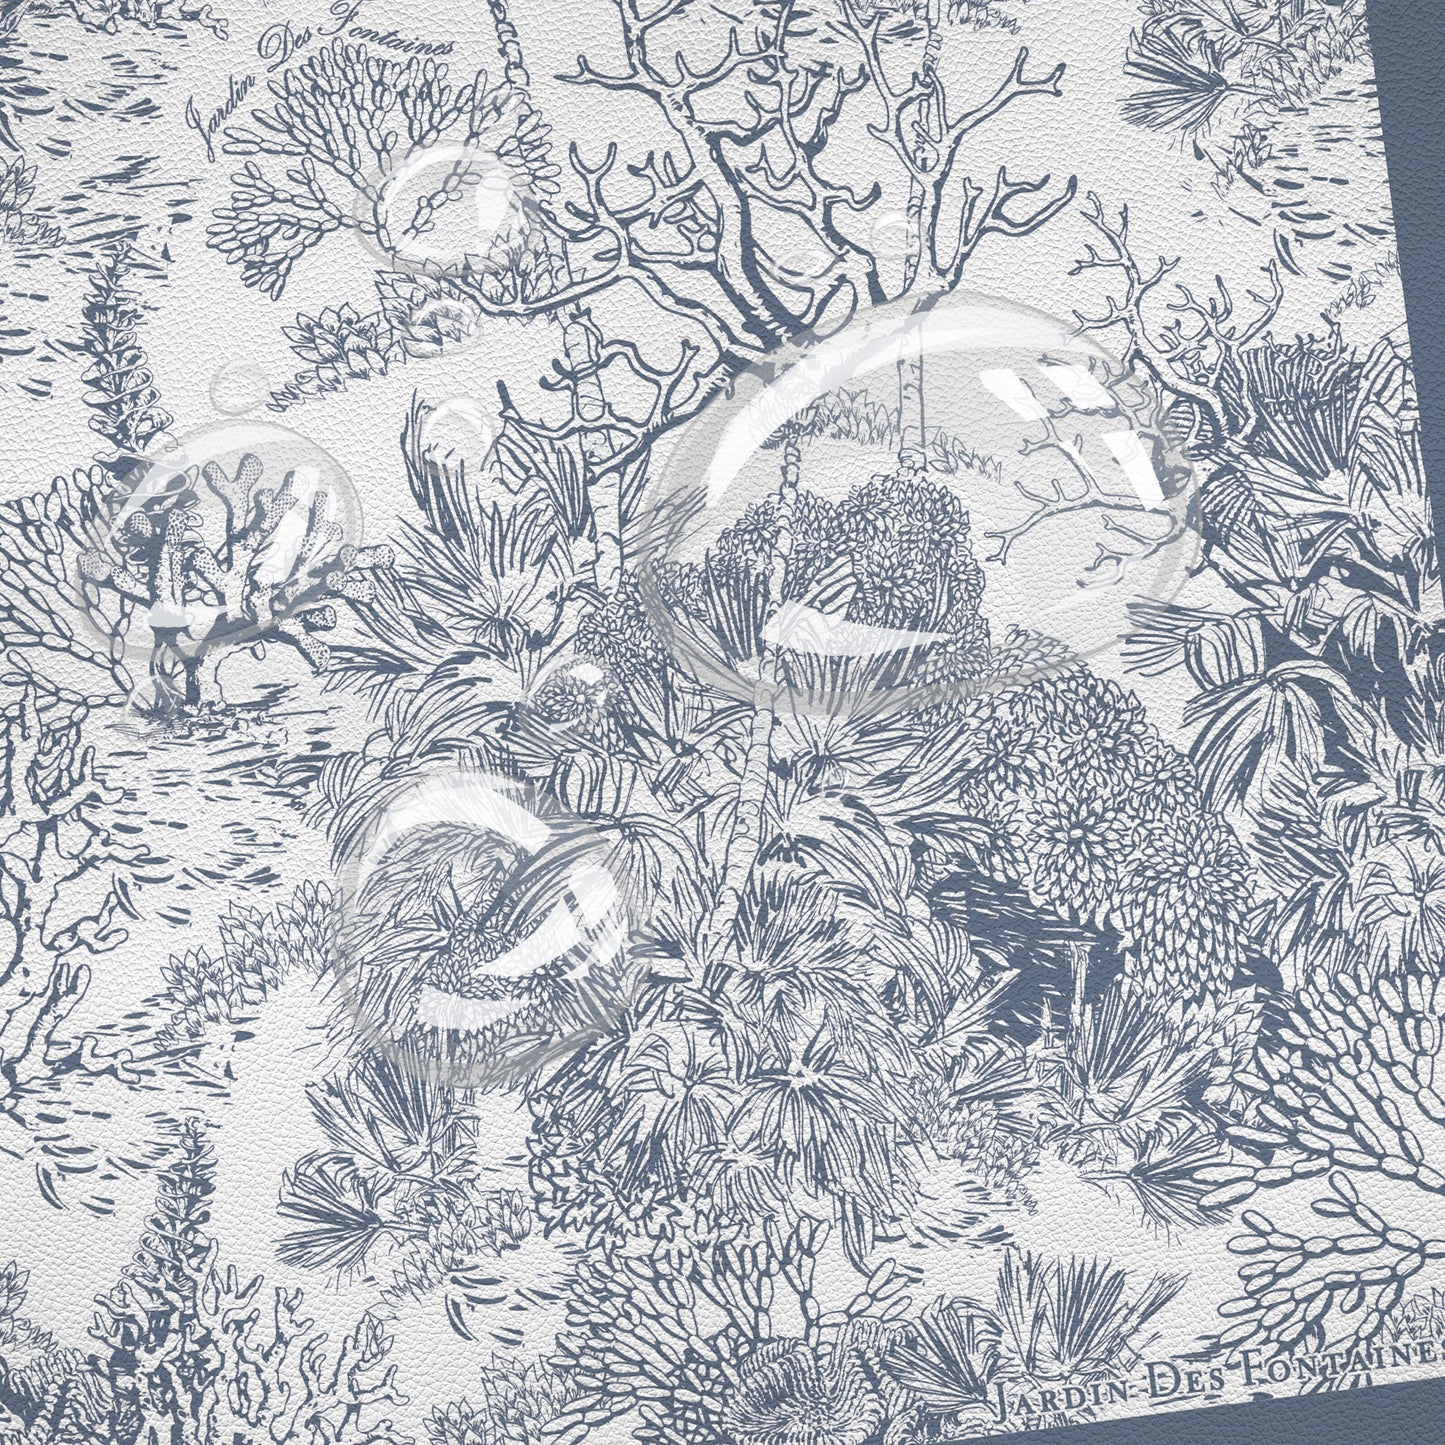 "Toile De  Jouy" PU Leather Mouse Pad